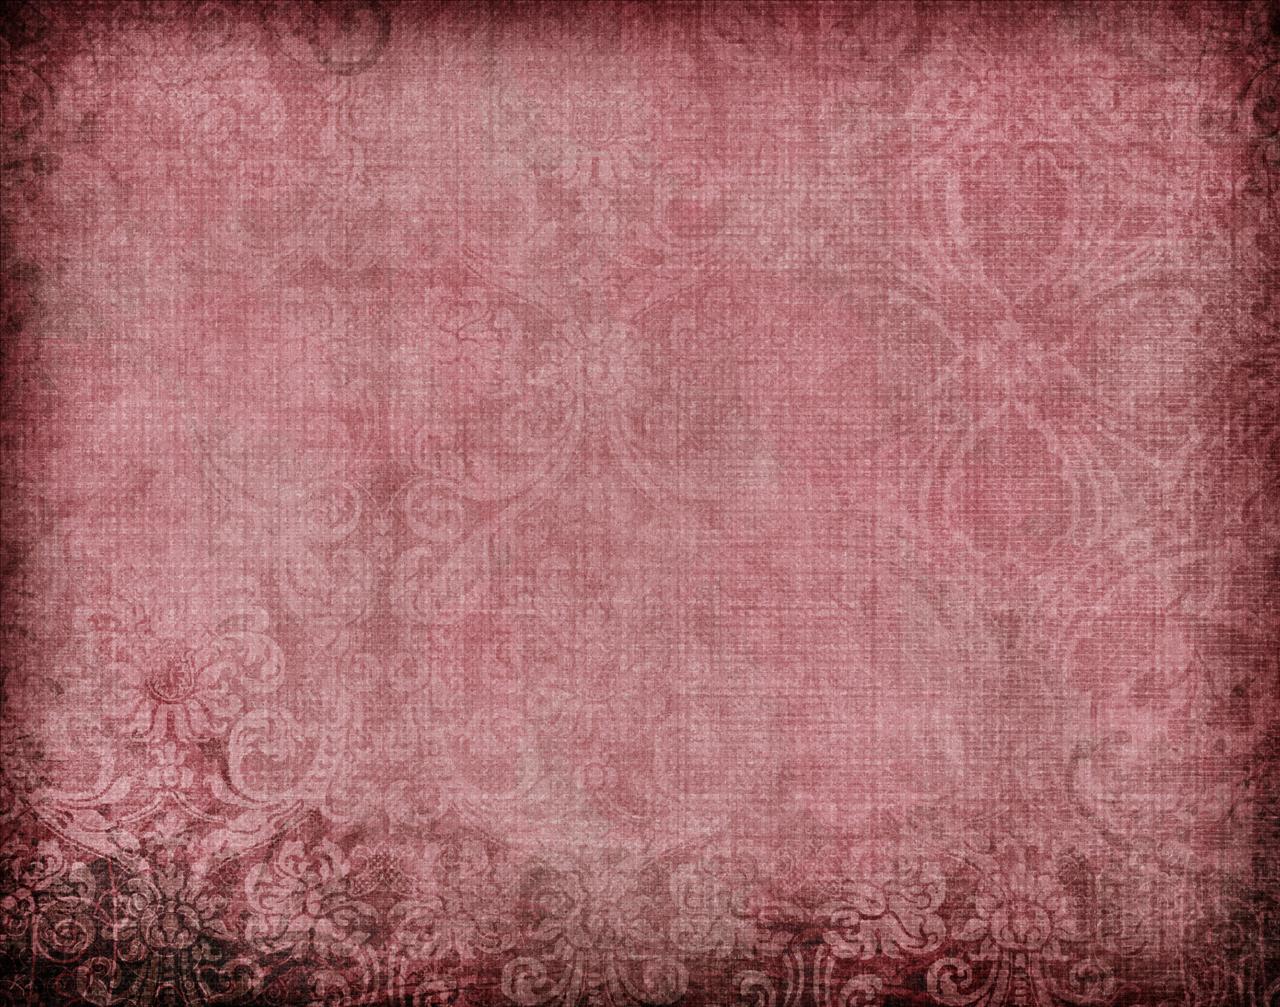 Pink Vintage Lace Background Image Pictures Becuo